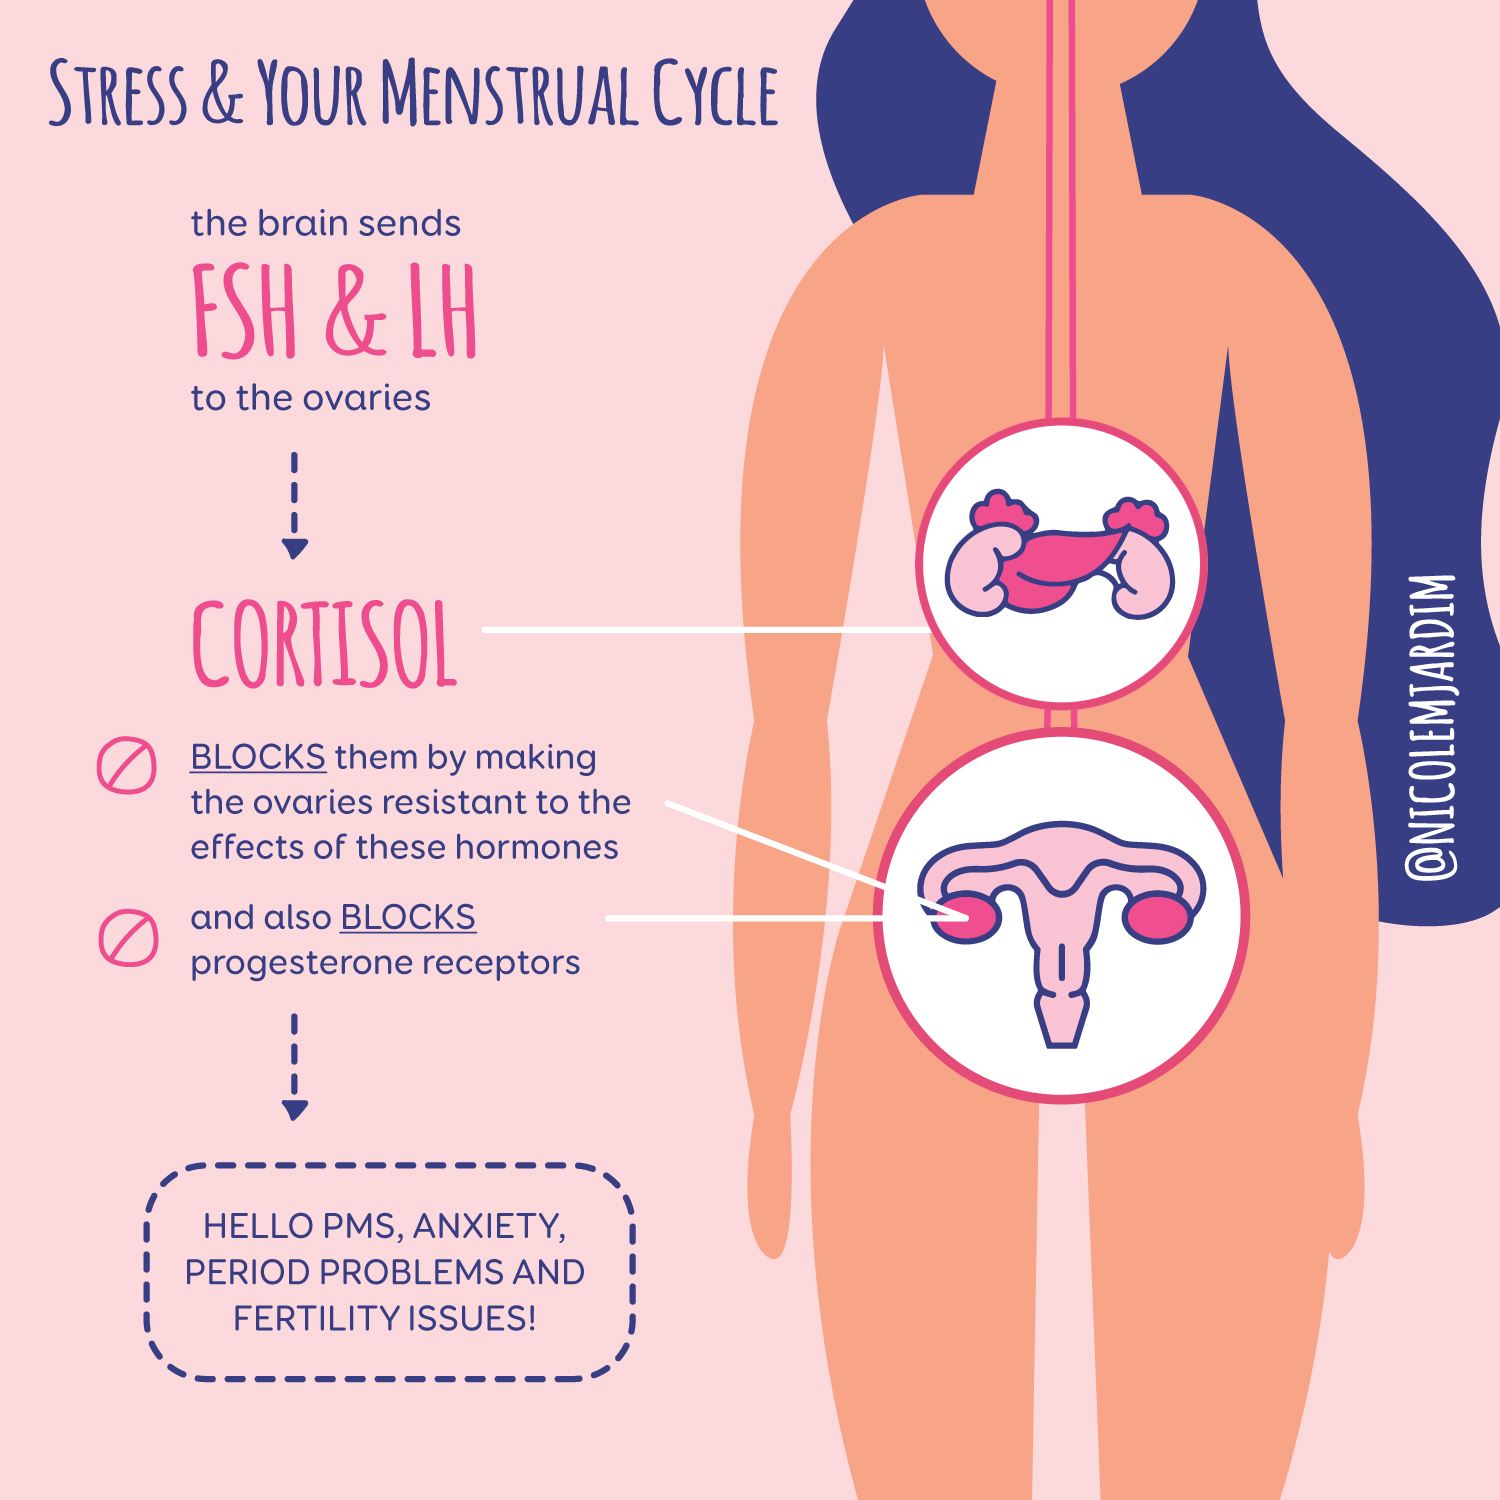 How Stress Affects Your Menstrual Cycle